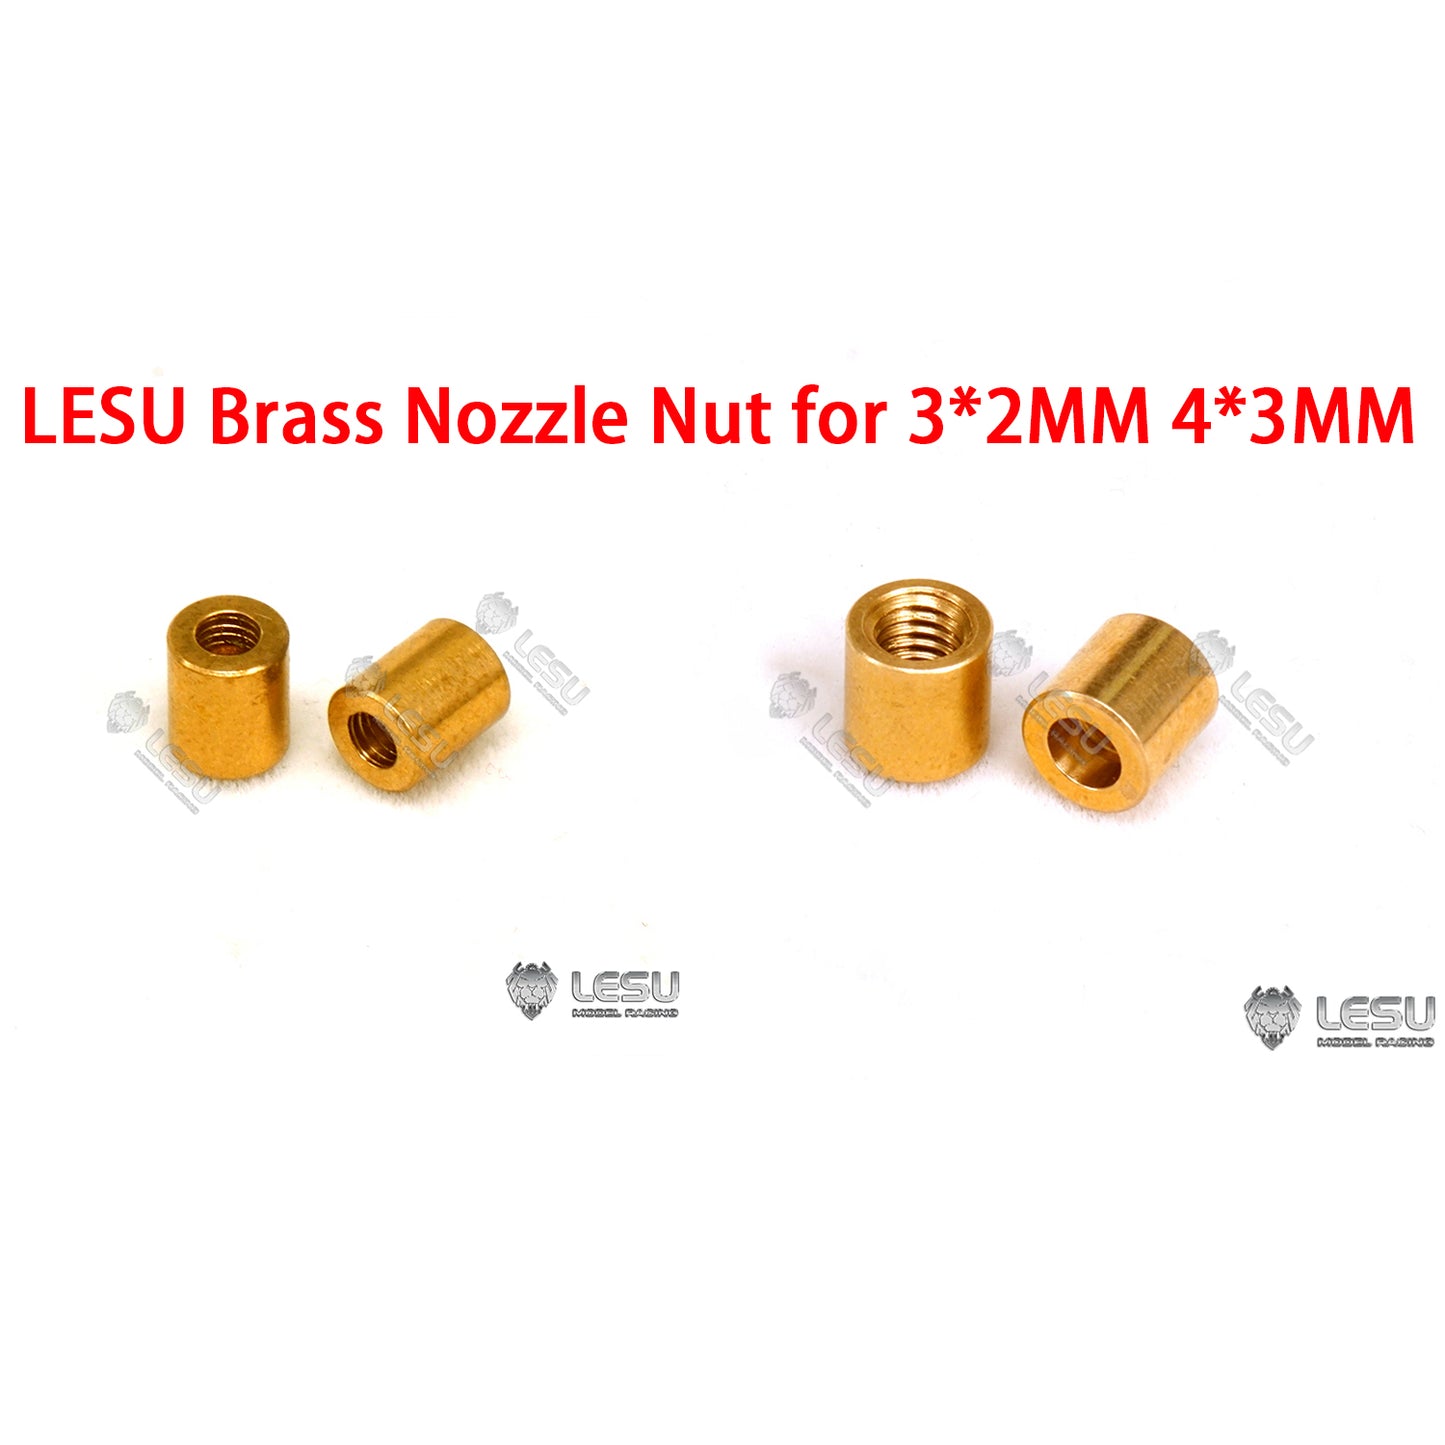 LESU Brass Nozzle Nut for 3*2MM 4*3MM Pipe for 1:14 Scale RC Hydraulic Excavator Cater Loader Dumper Truck Replacement Parts